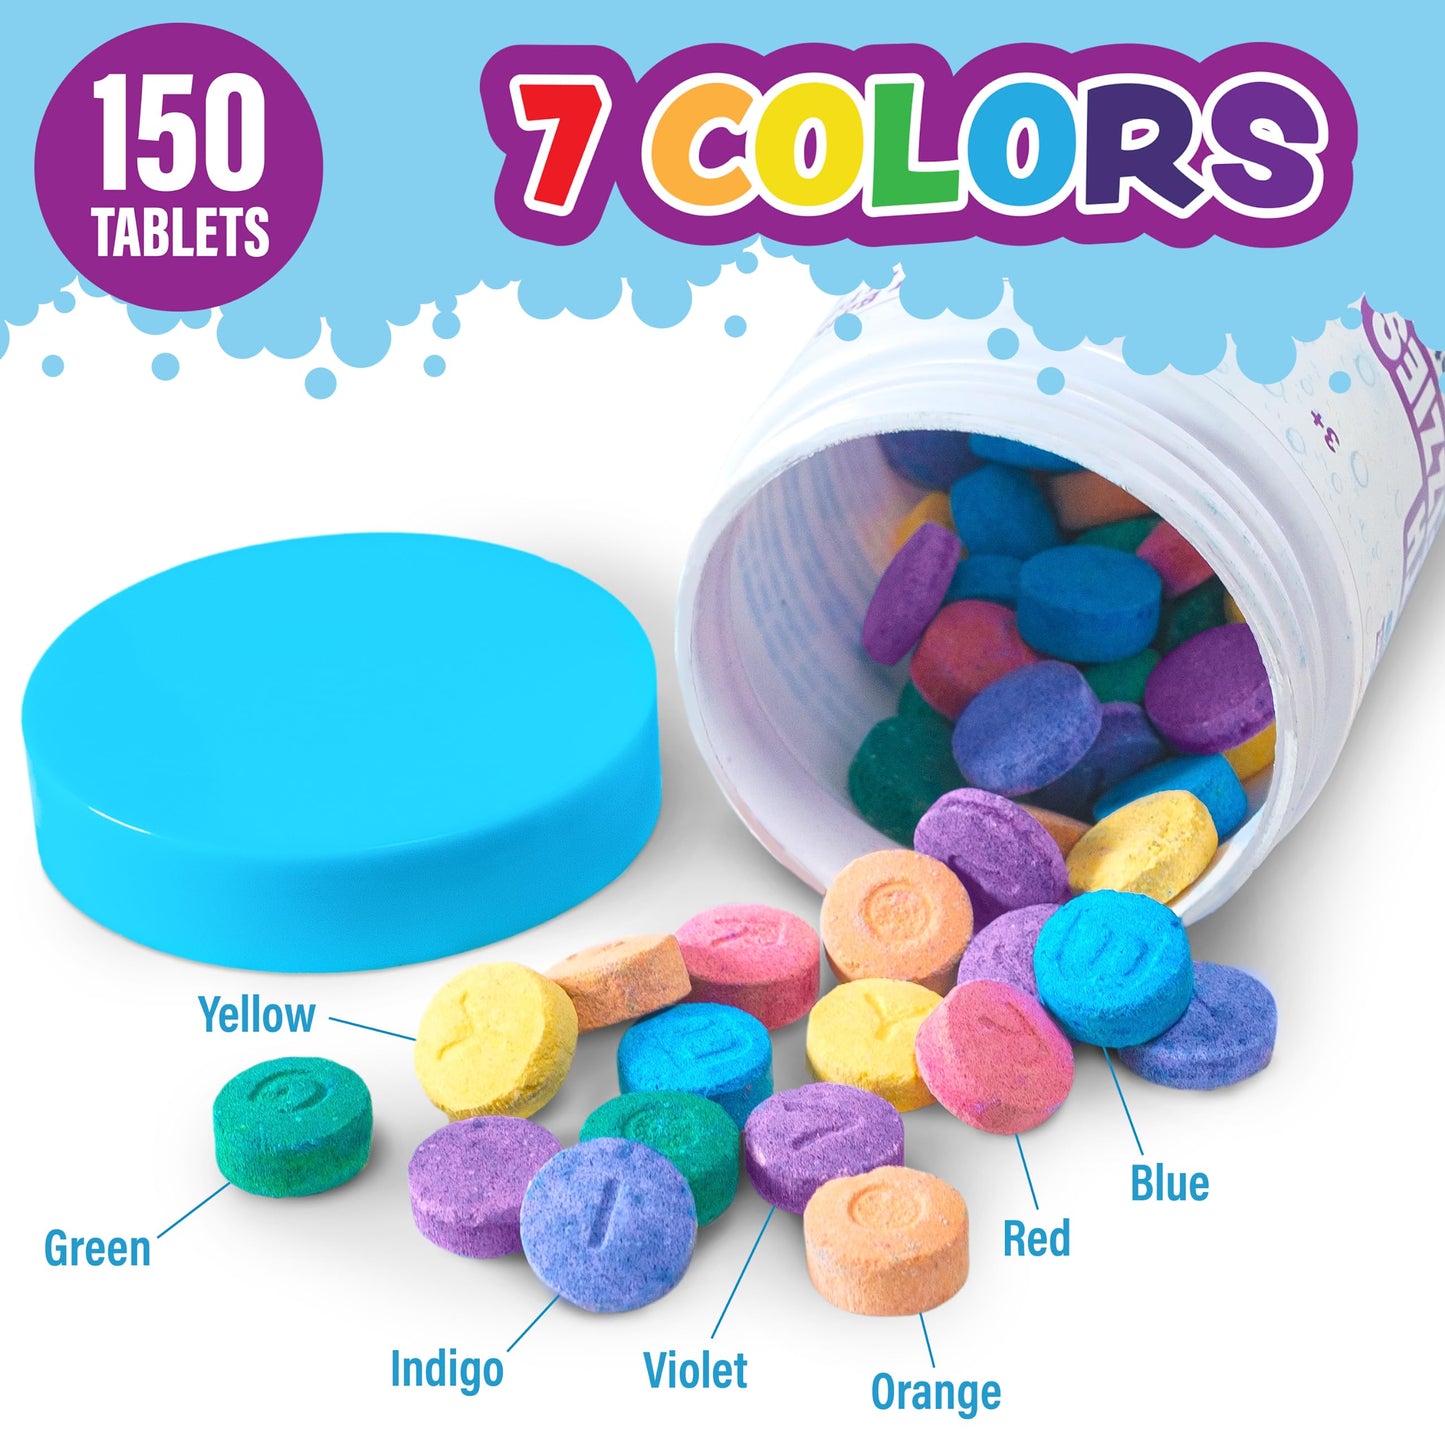 Tub Works® Smooth™ Bath Crayons Bath Toy, 12 Pack | Nontoxic, Washable Bath Crayons for Toddlers & Kids | Unique Formula Draws Smoothly & Vividly on Wet & Dry Tub Walls | Hexagon Grip Bathtub Crayons